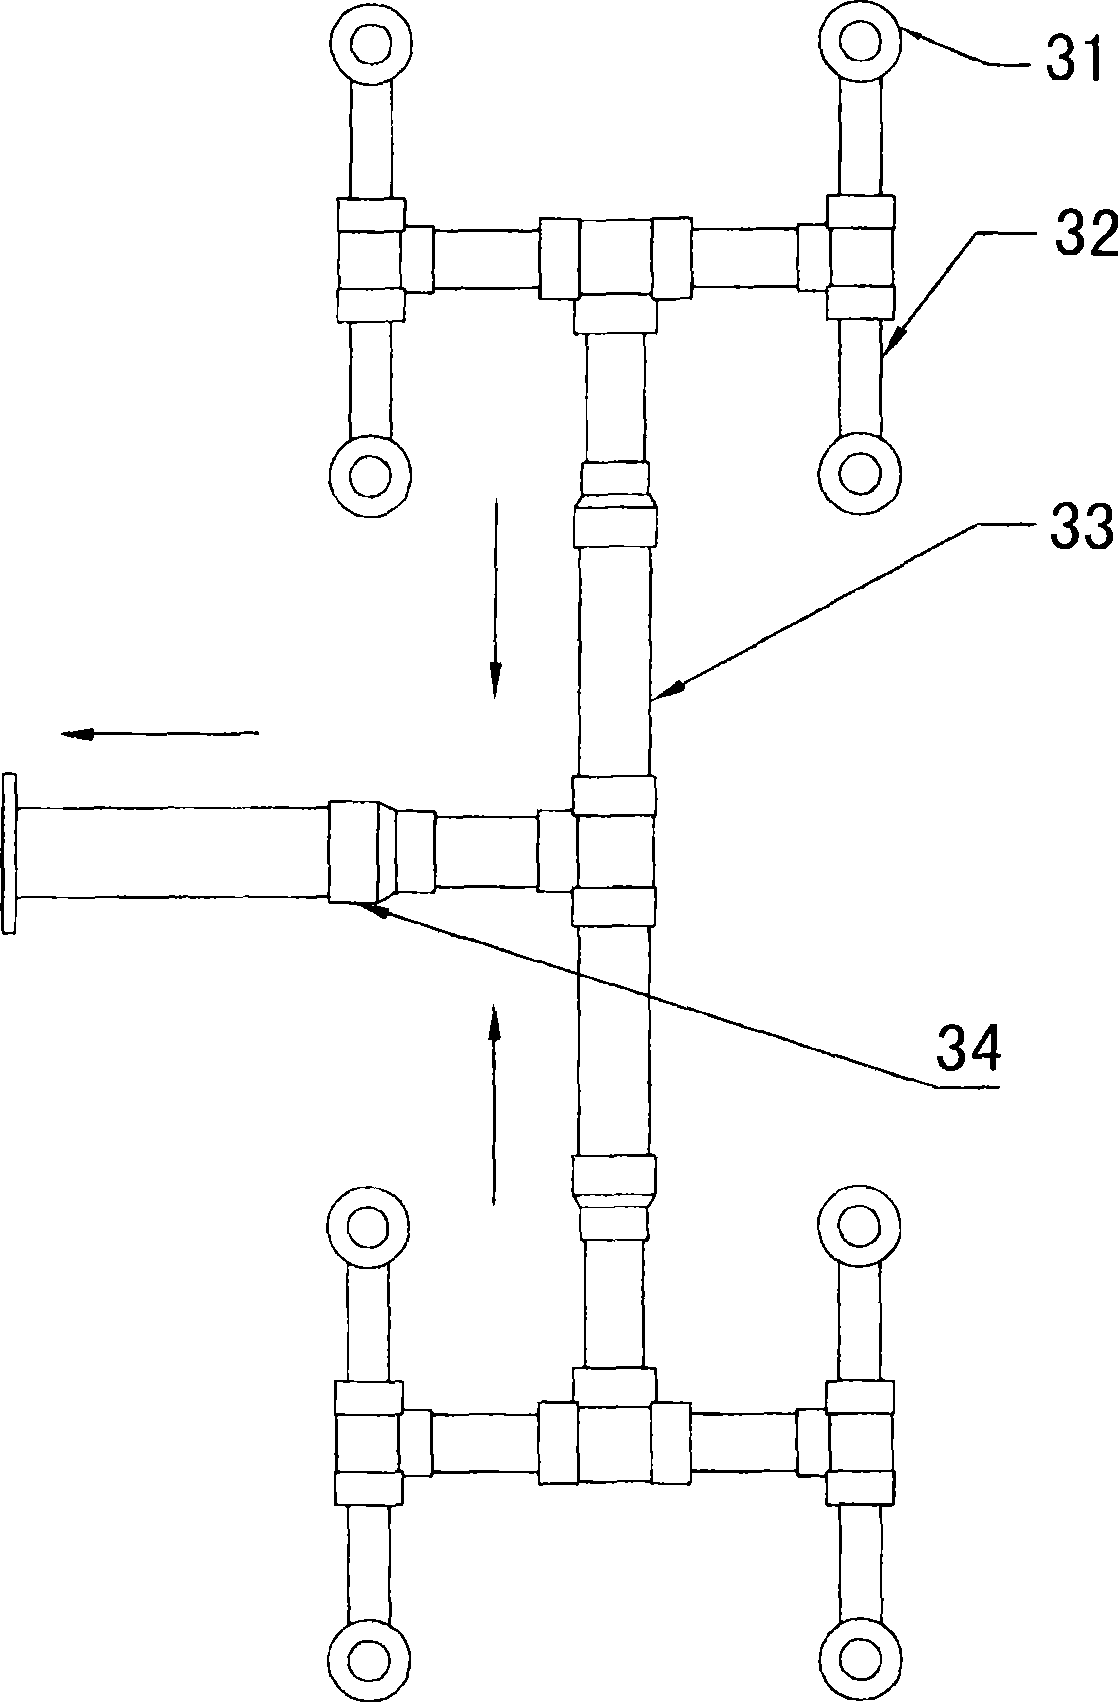 Biochemical treatment apparatus for wastewater treatment